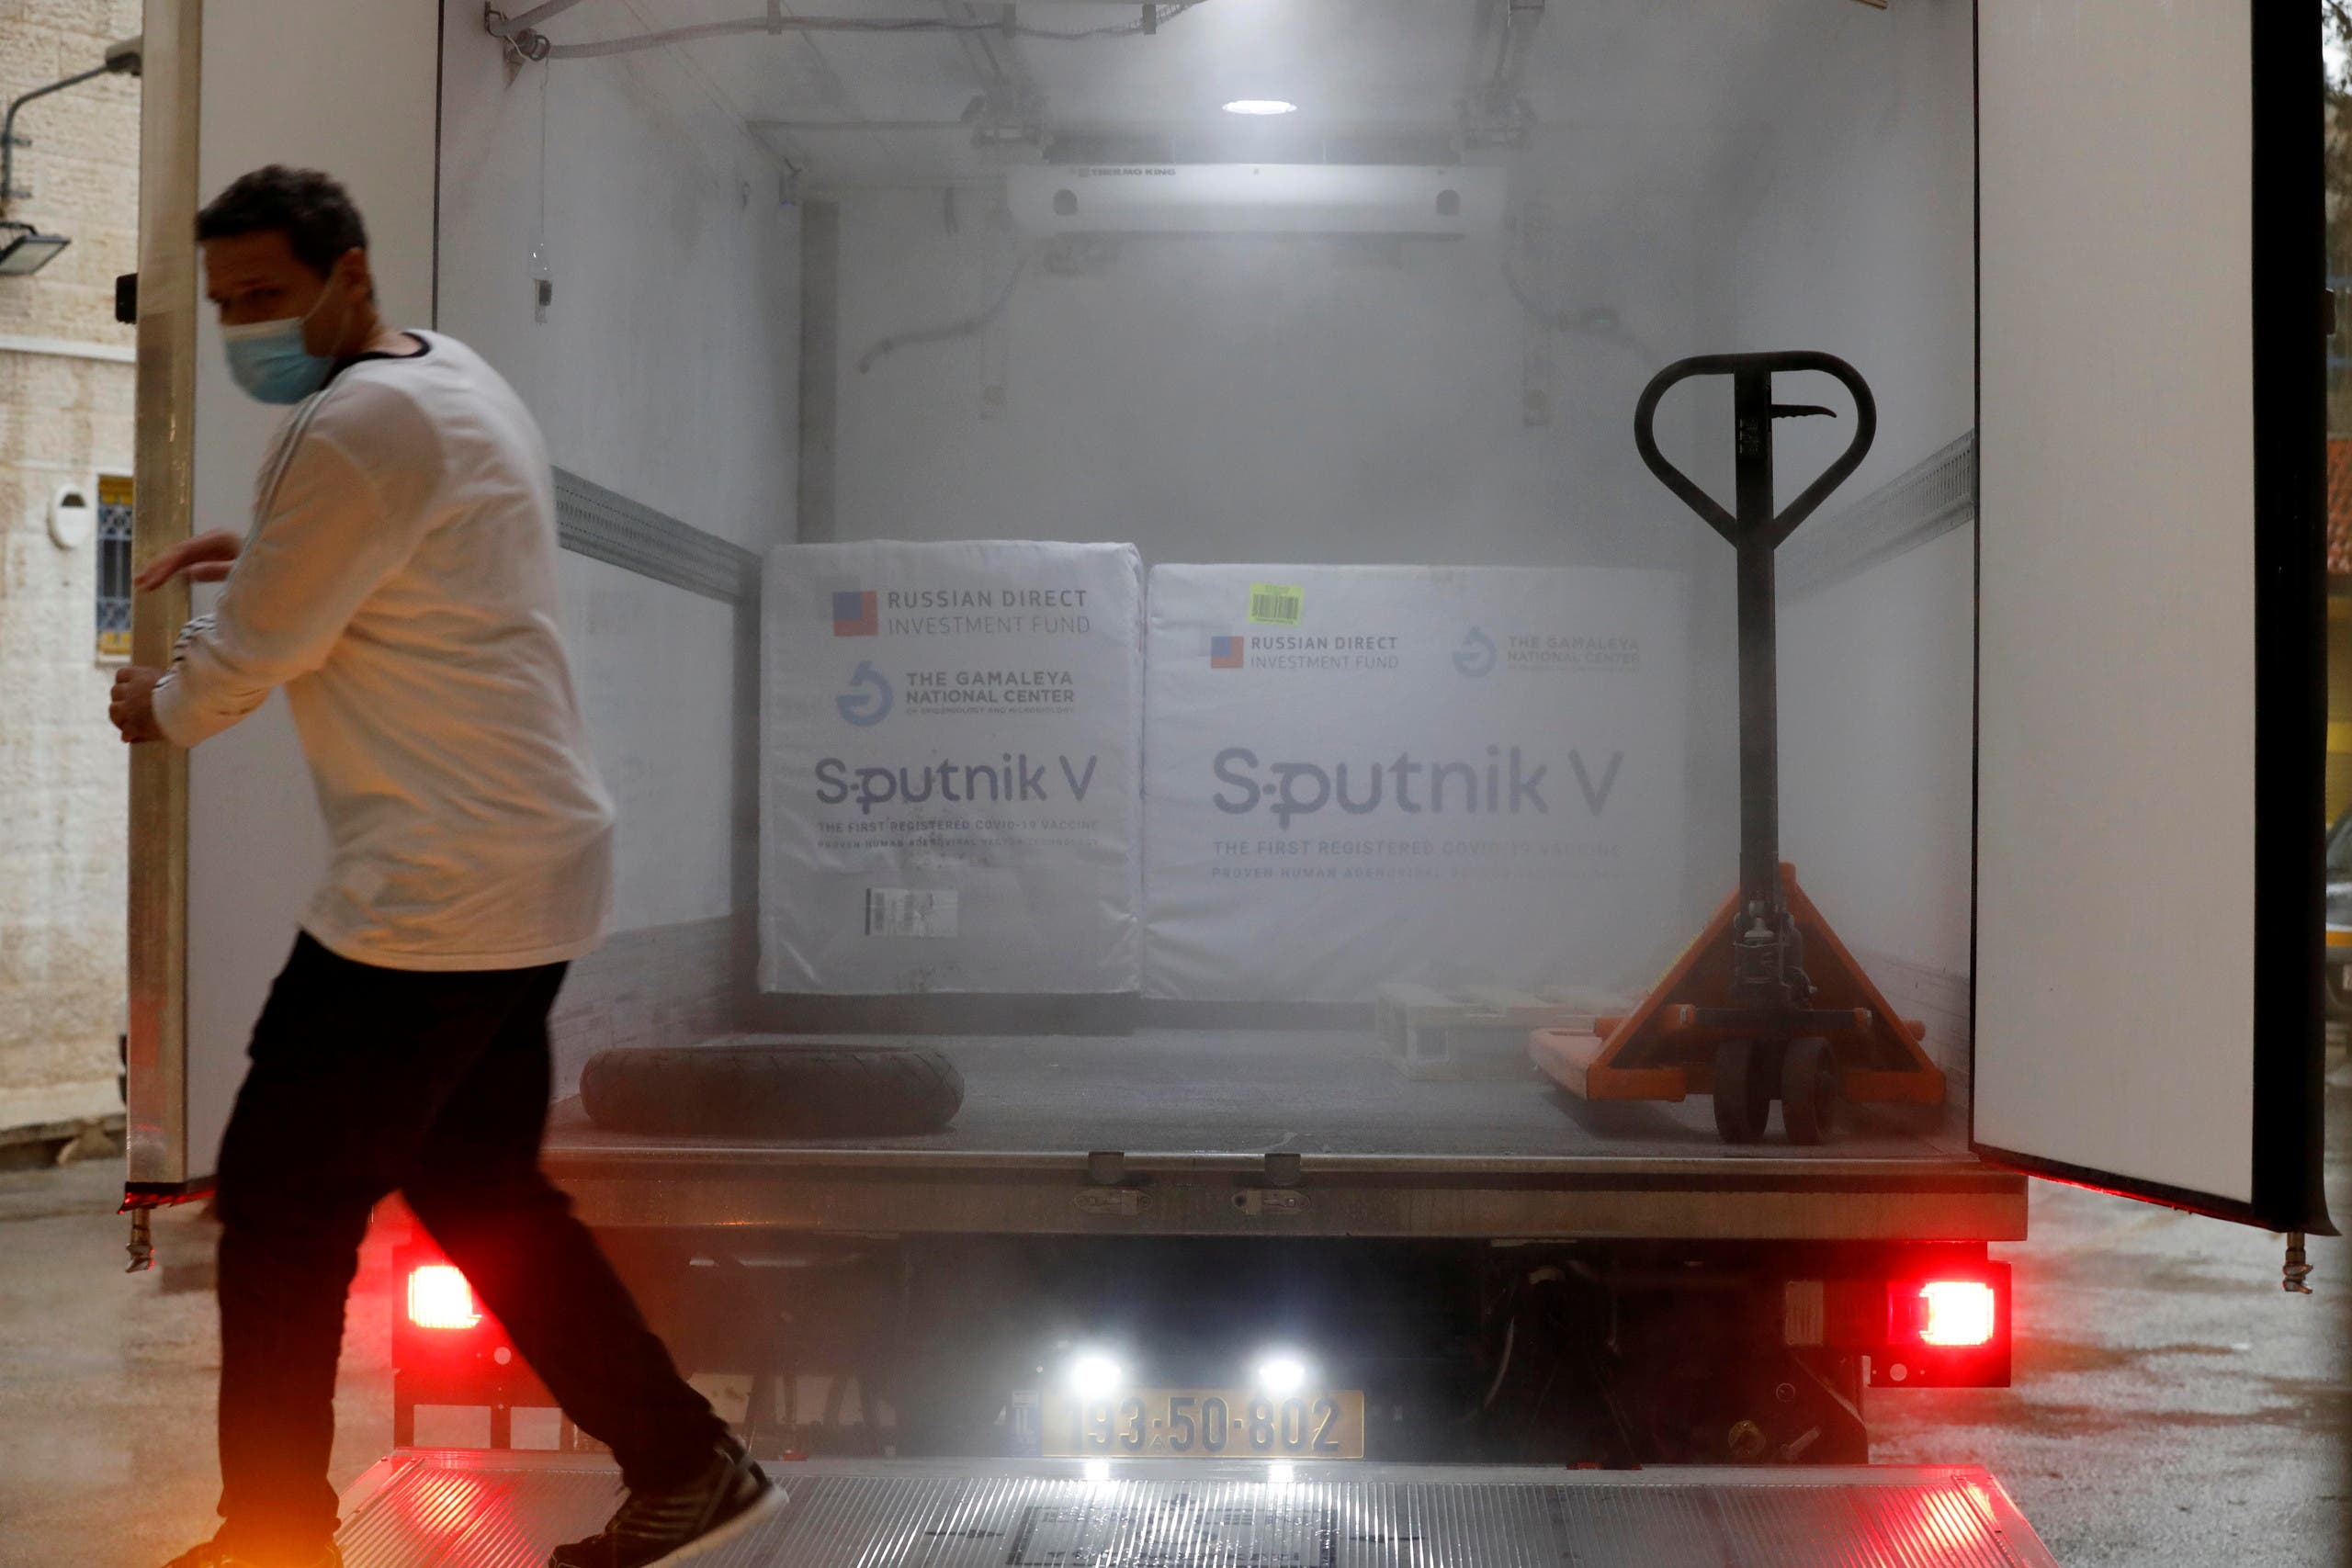 A Palestinian worker prepares to unload a shipment of Russia's Sputnik V vaccine amid the coronavirus disease (COVID-19) outbreak, in Ramallah. (Reuters)